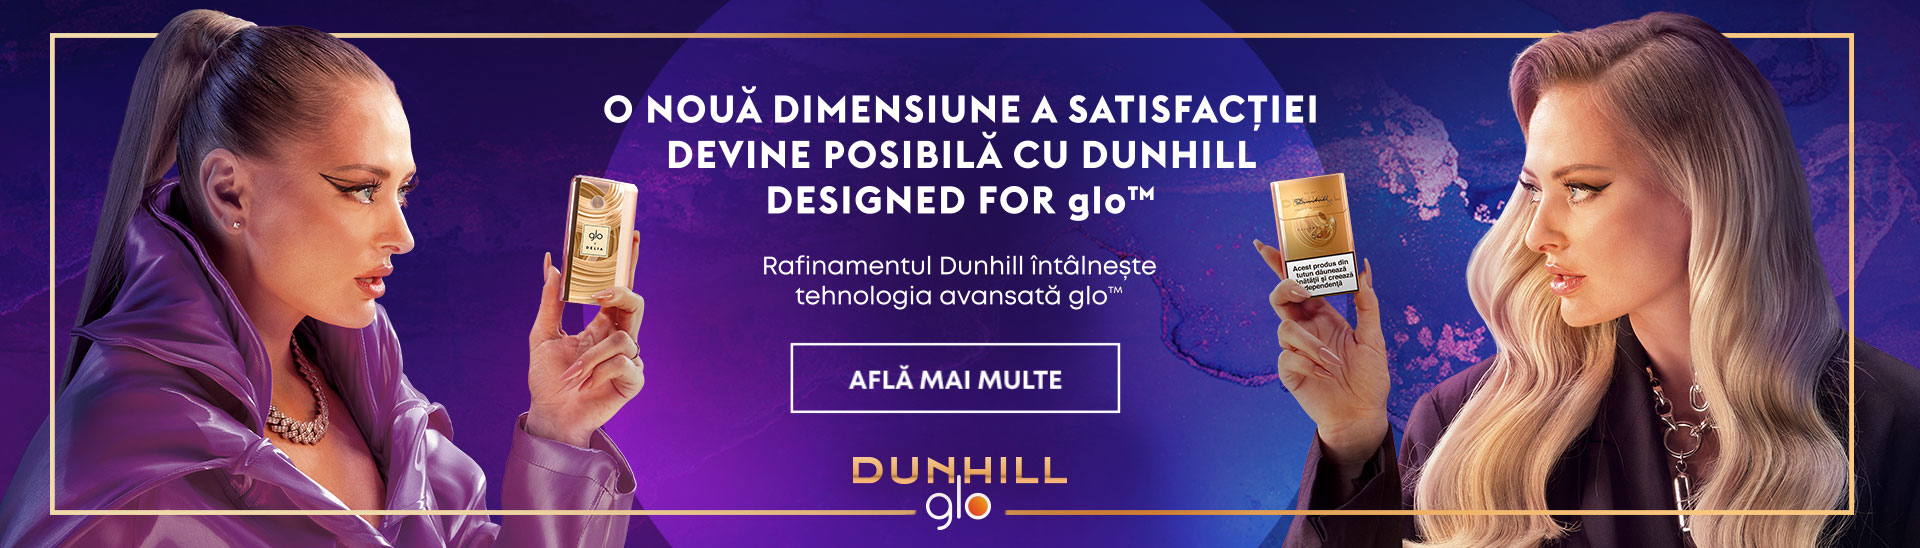 dunhill banner